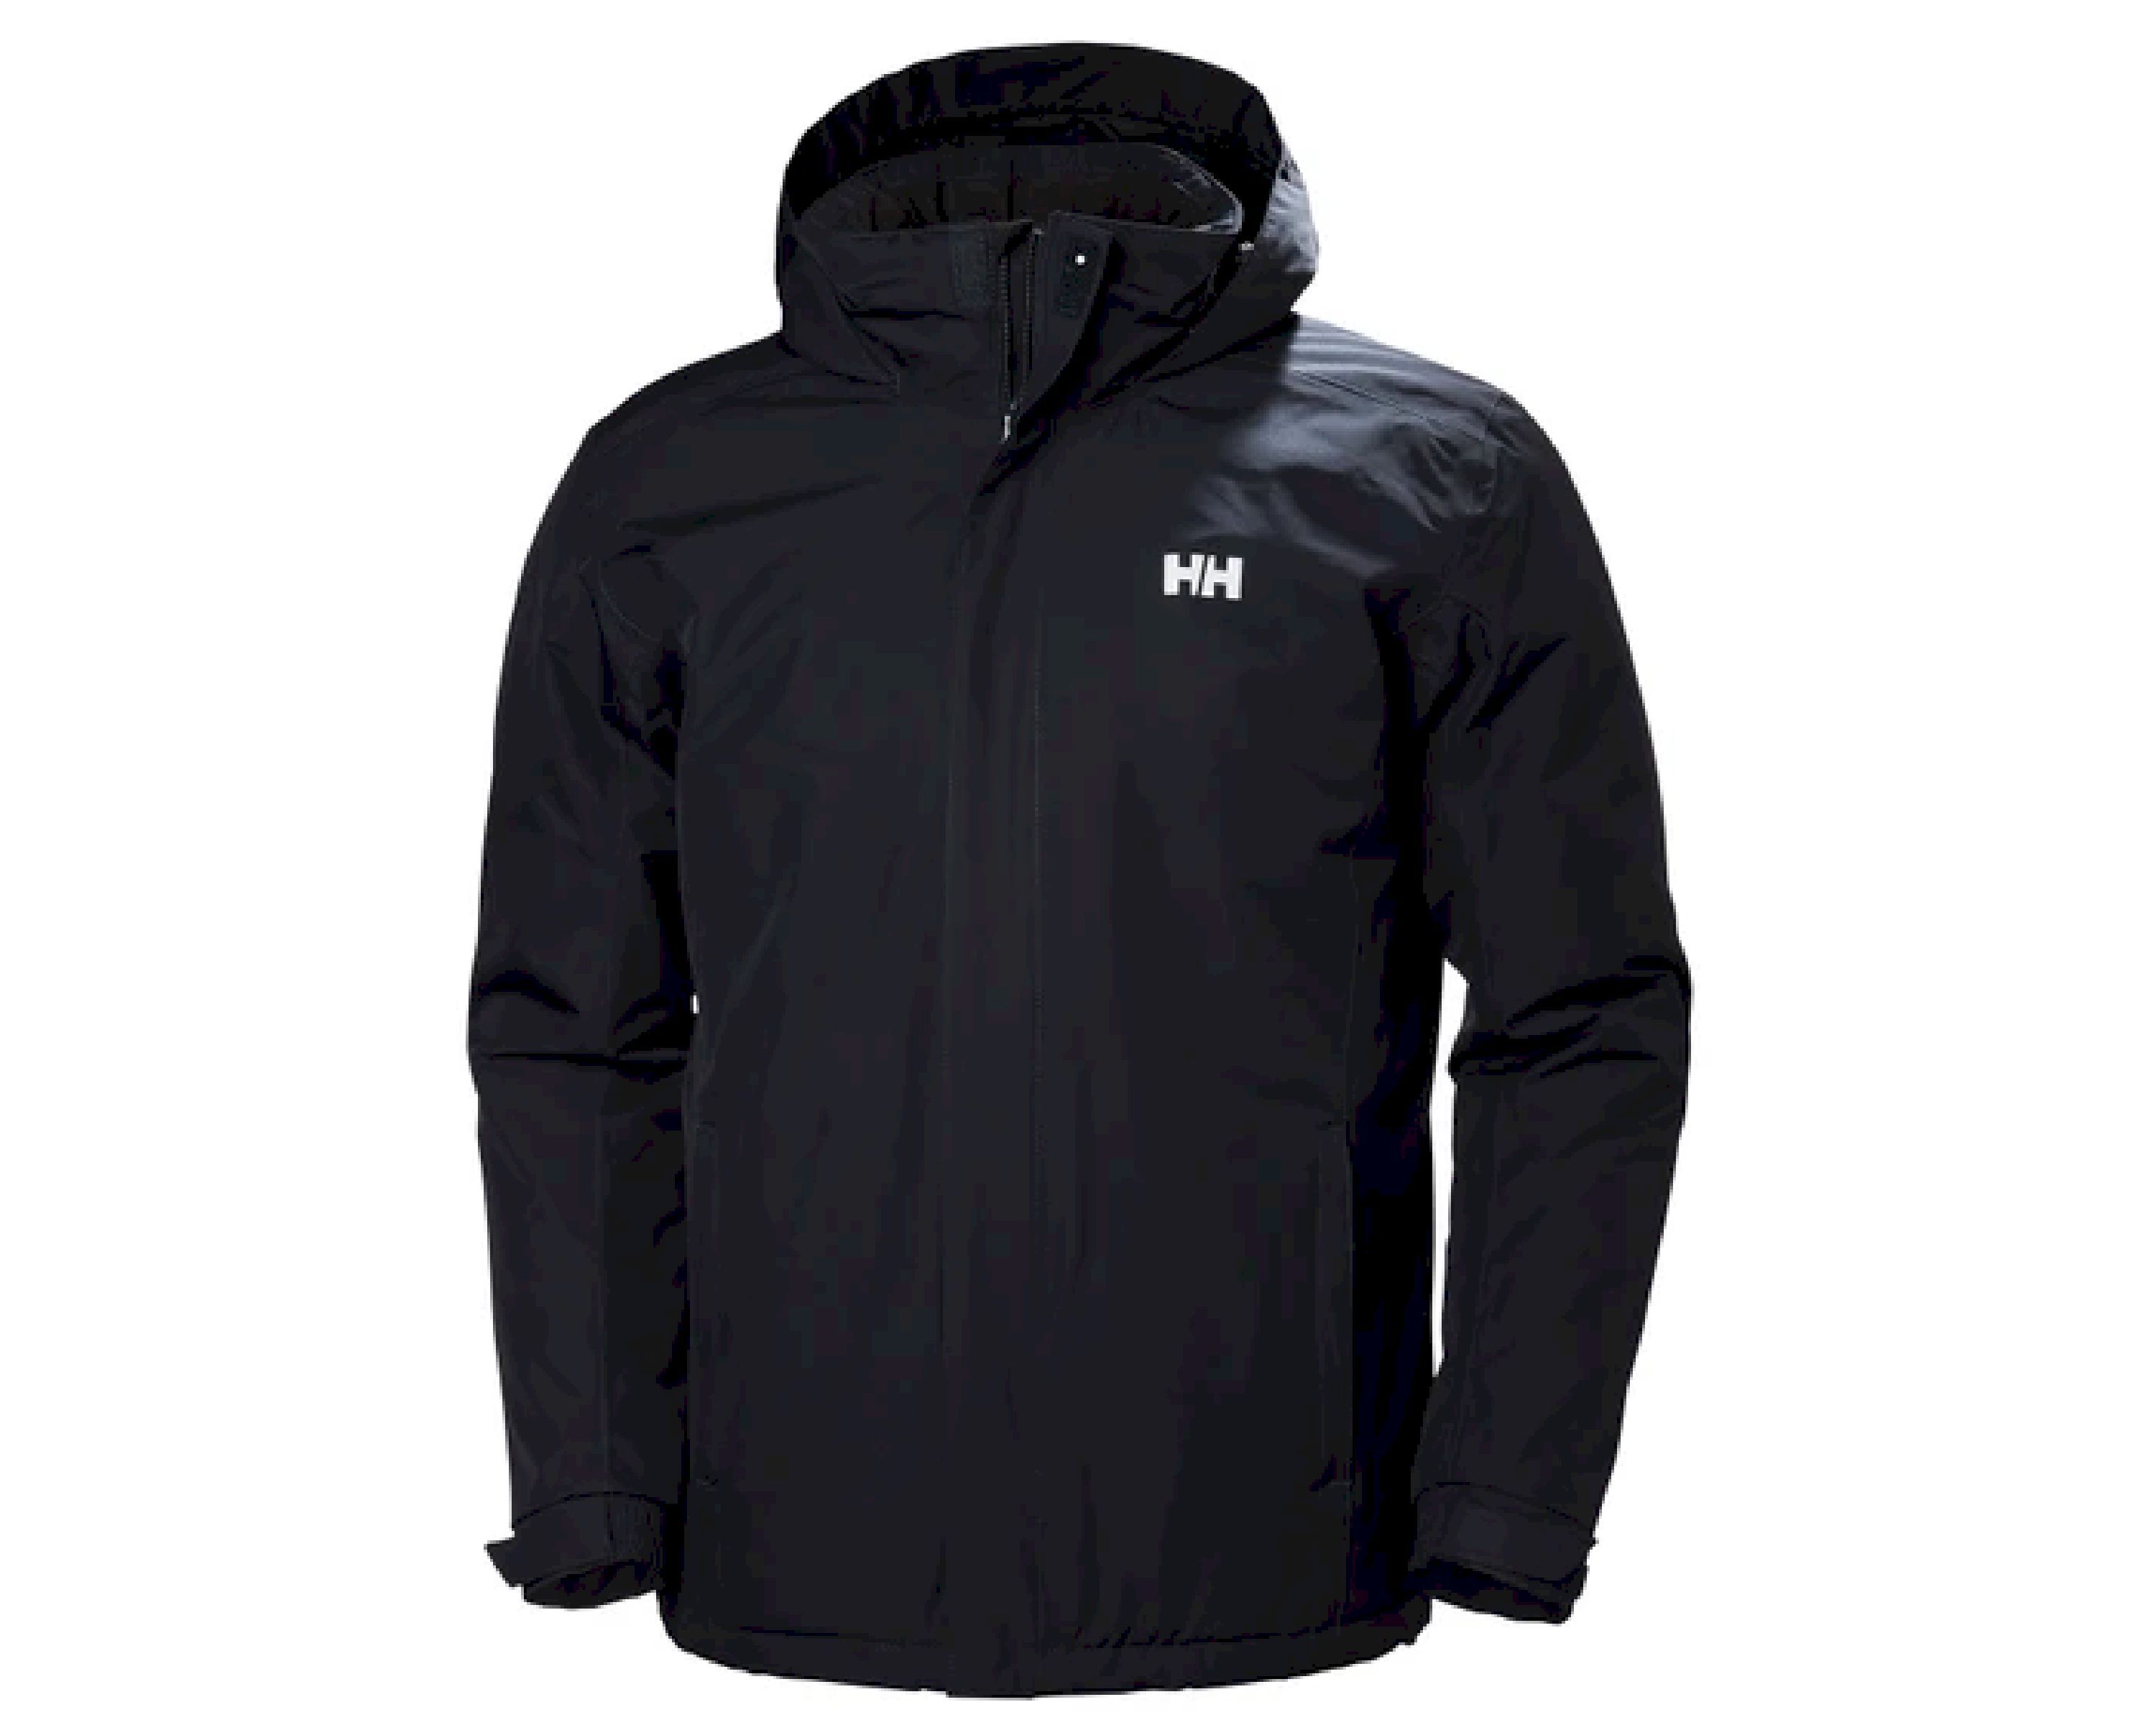 Helly Hansen Dubliner Insulated Jacket - Giacca a vento - Uomo | Hardloop